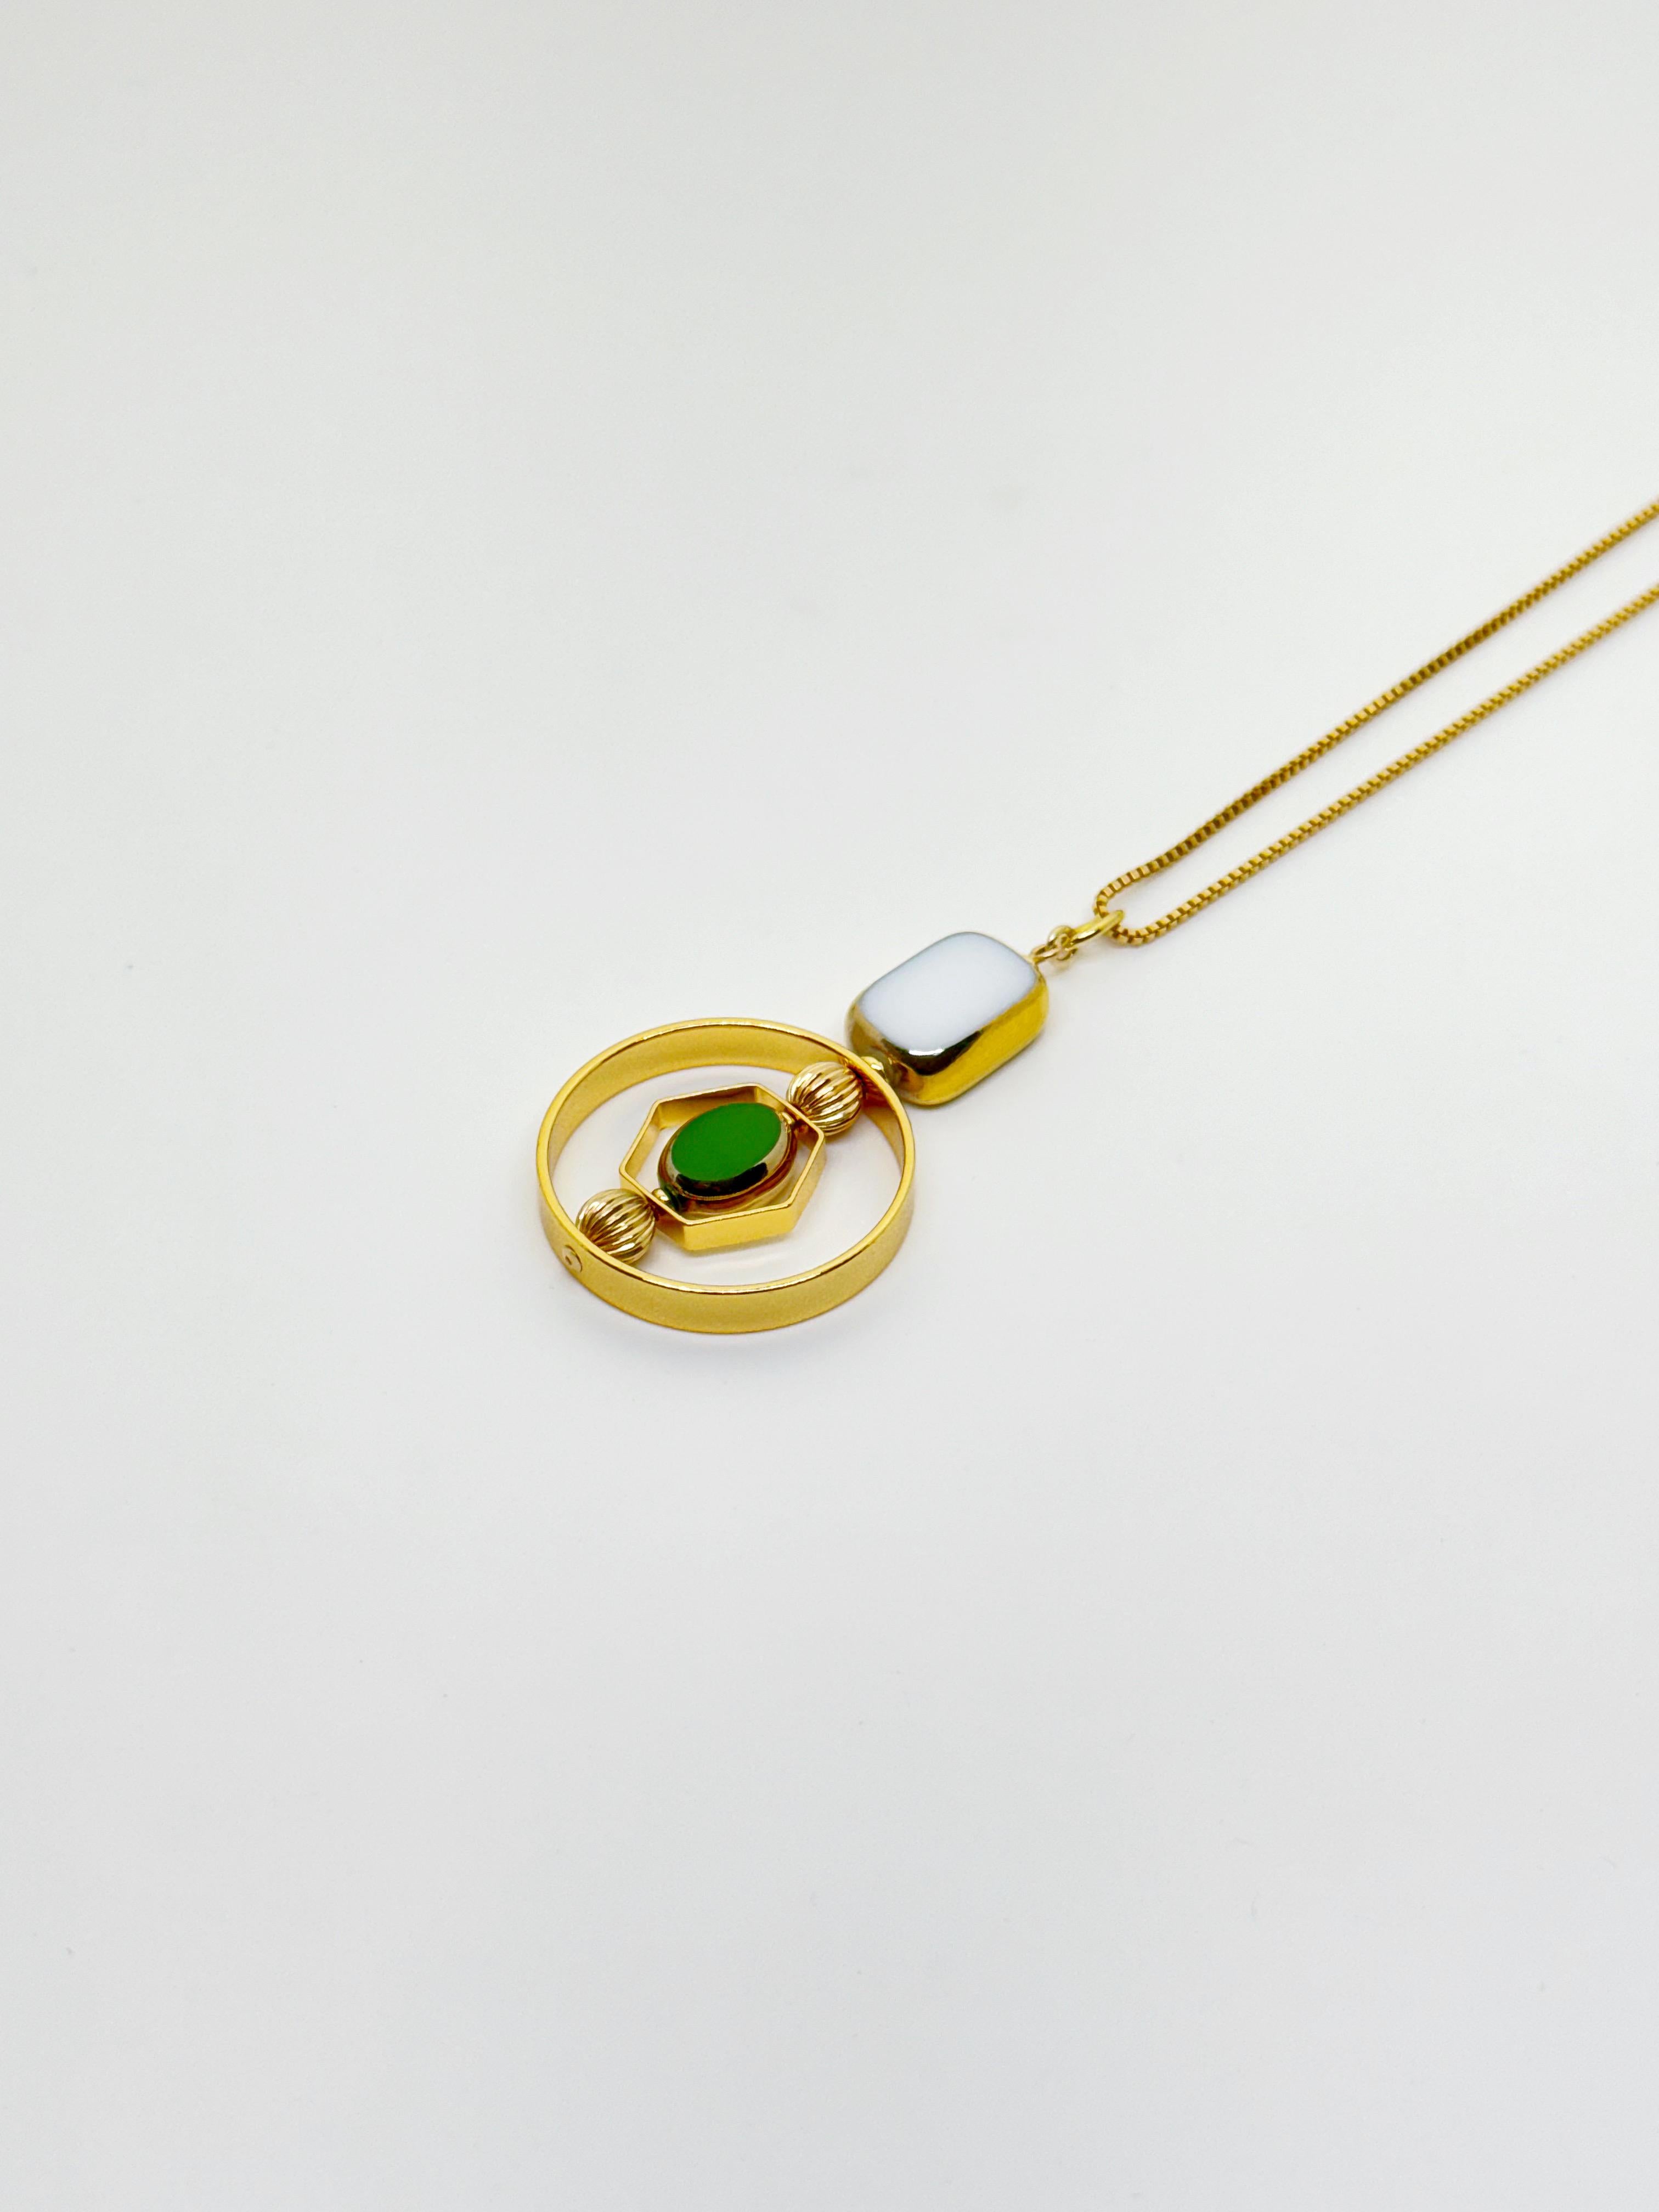 The pendant consists of white tile shape and small green oval new old stock vintage German glass beads that are framed with 24K gold. The beads were hand-pressed during the 1920s-1960s. No two beads are exactly alike. These beads are no longer in